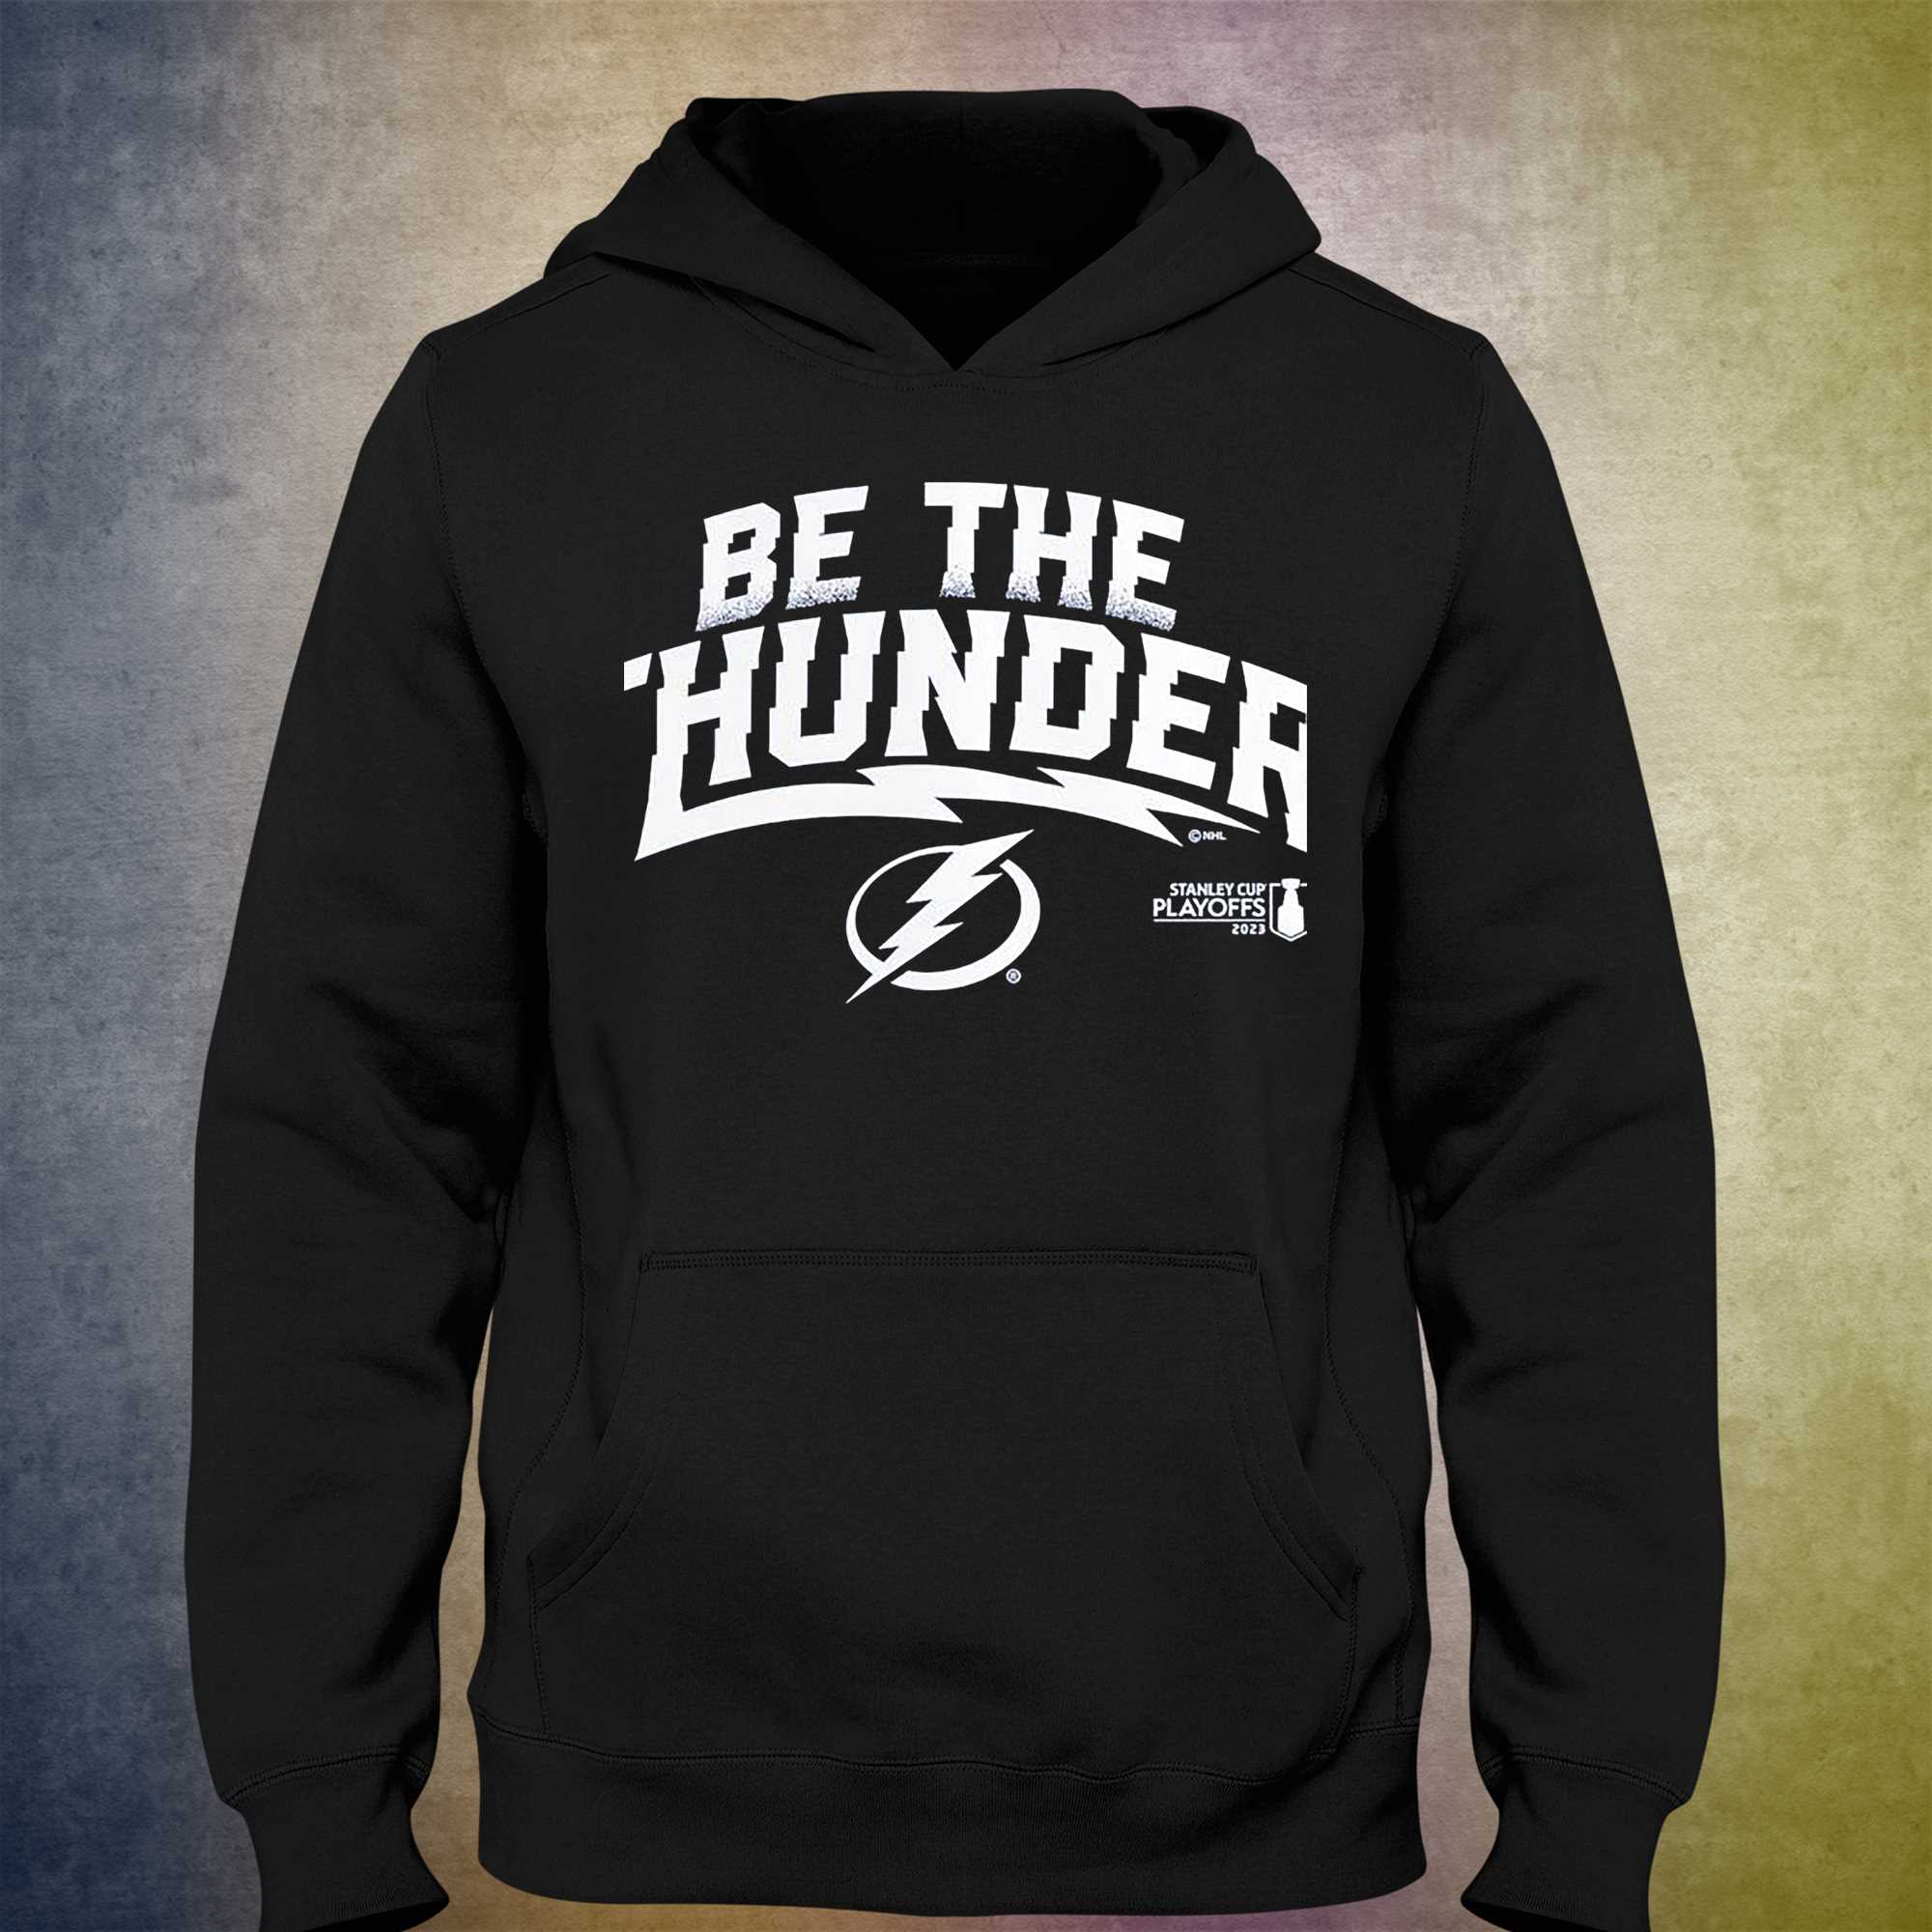 Tampa Bay Lightning My Cup Size is Stanley shirt, hoodie, sweater